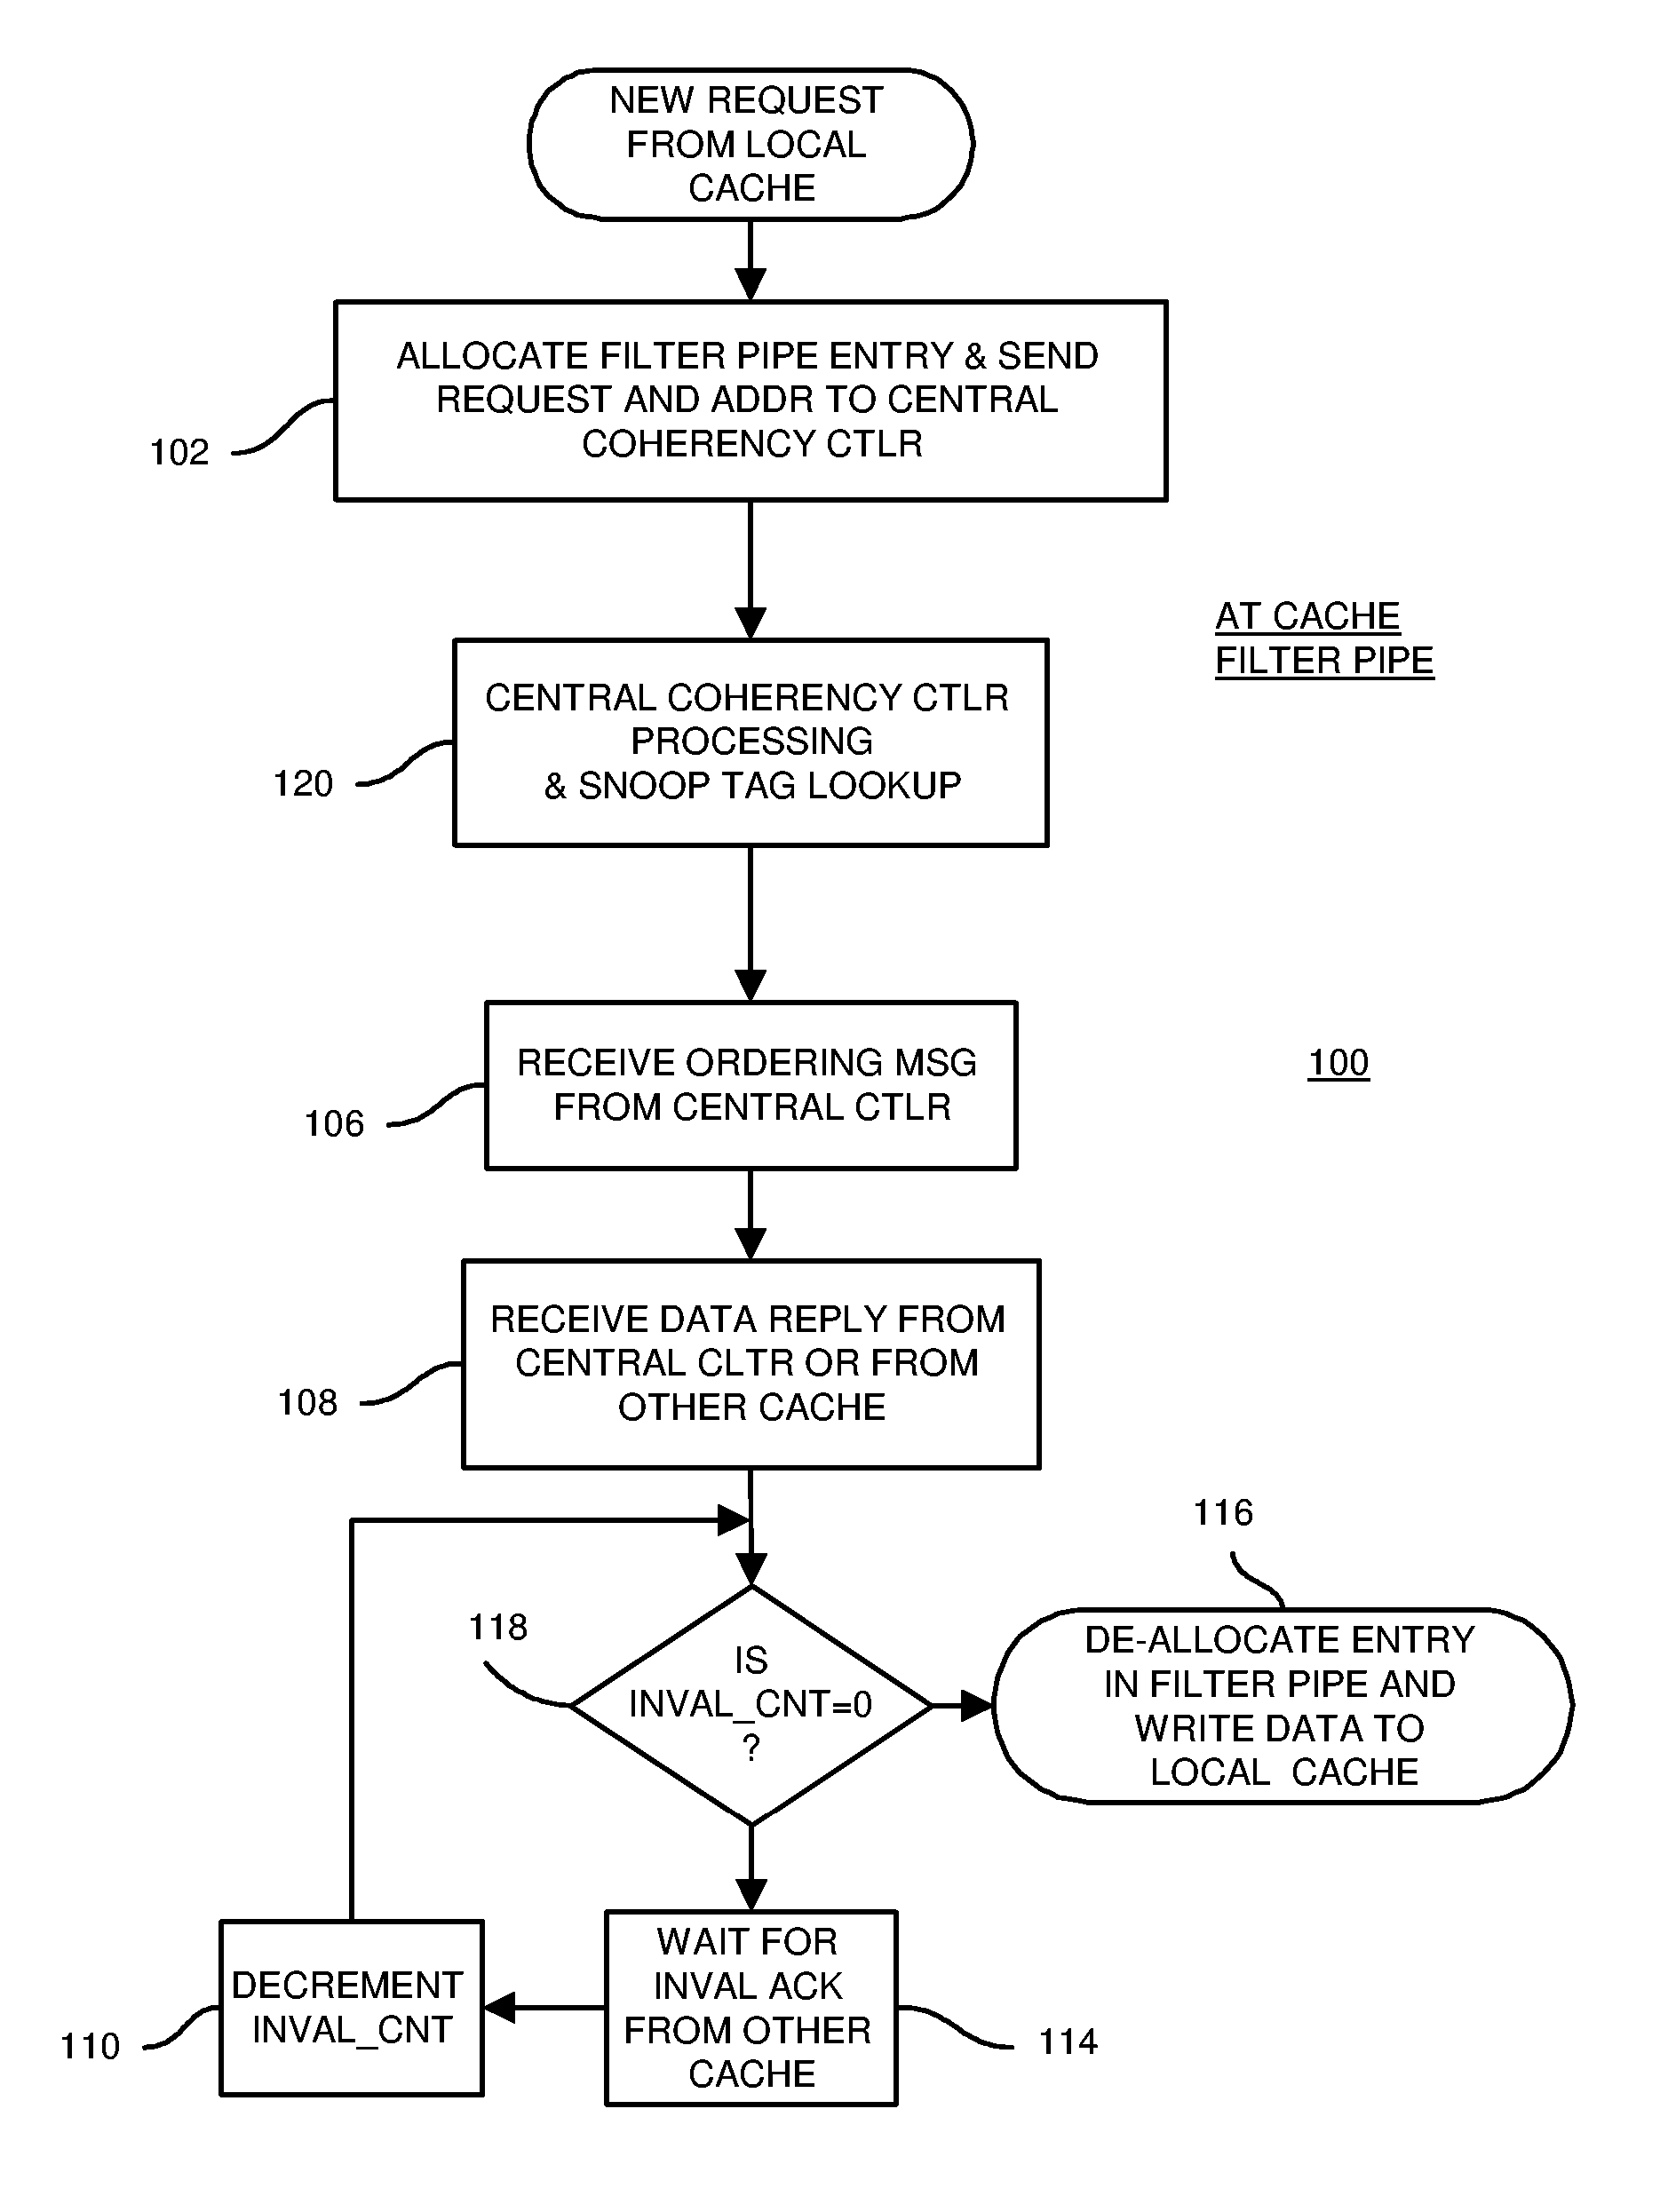 Distributed Cache Coherence at Scalable Requestor Filter Pipes that Accumulate Invalidation Acknowledgements from other Requestor Filter Pipes Using Ordering Messages from Central Snoop Tag